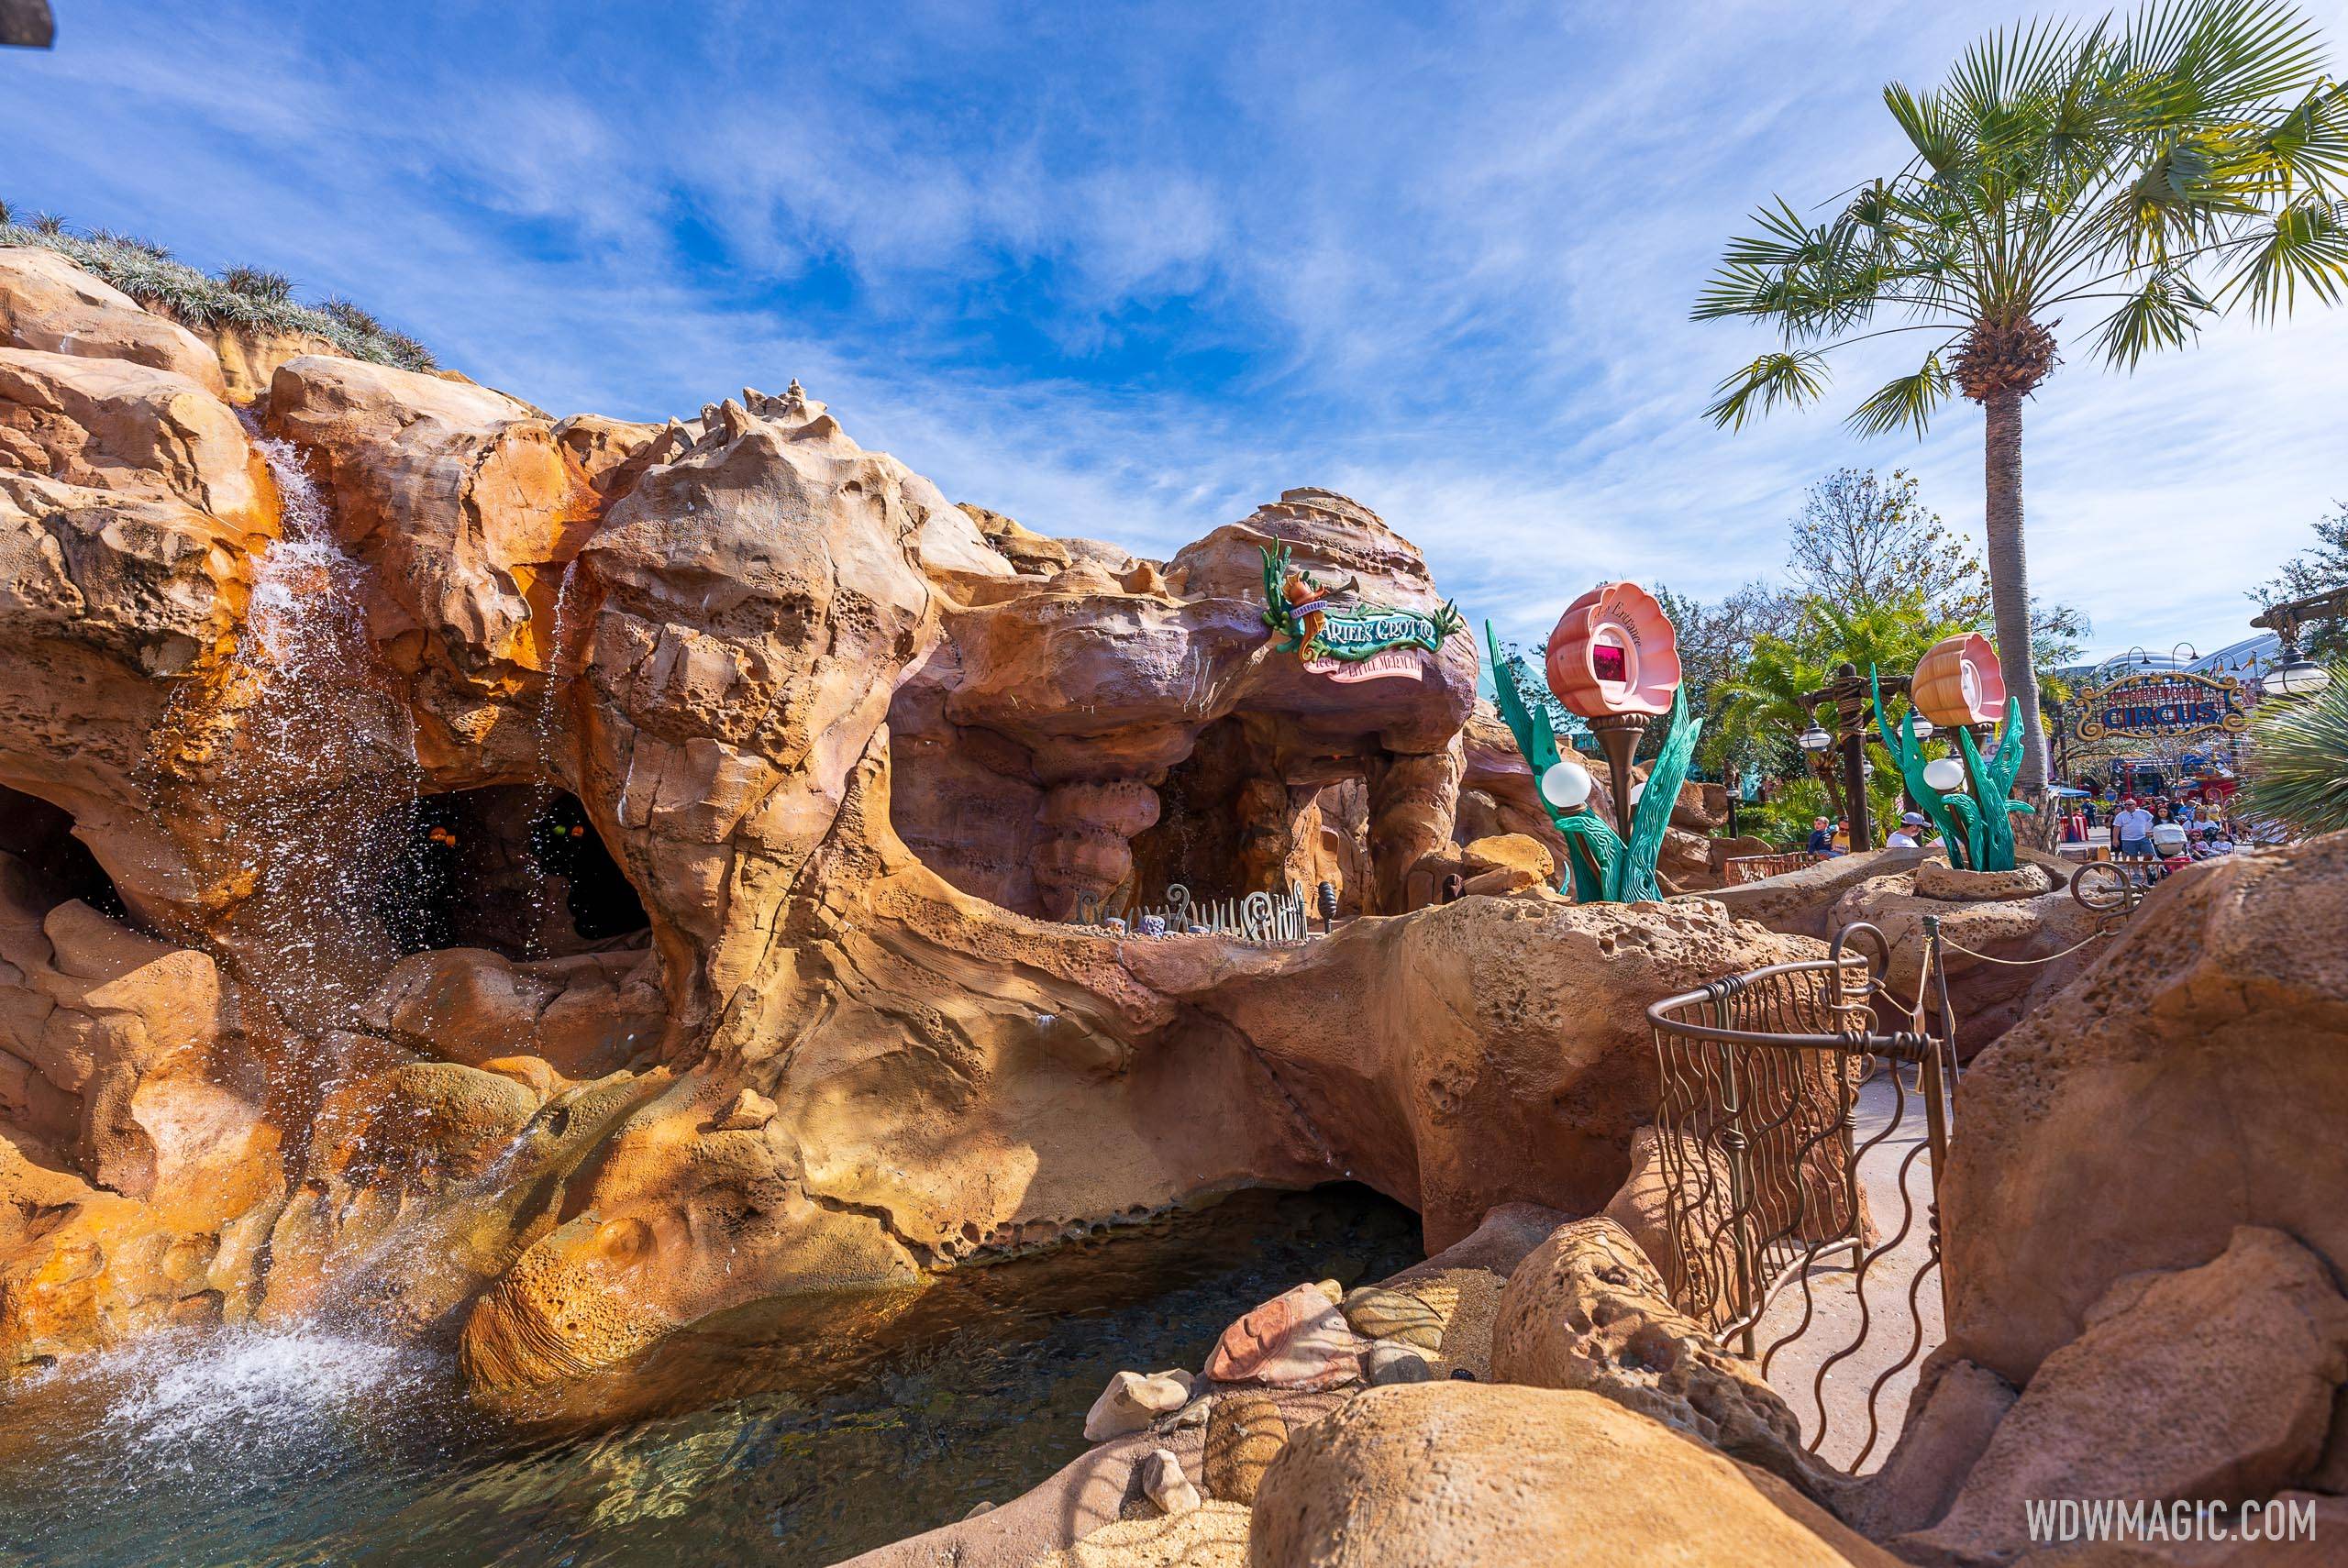 Ariel's Grotto is now part of Genie+ at Magic Kingdom